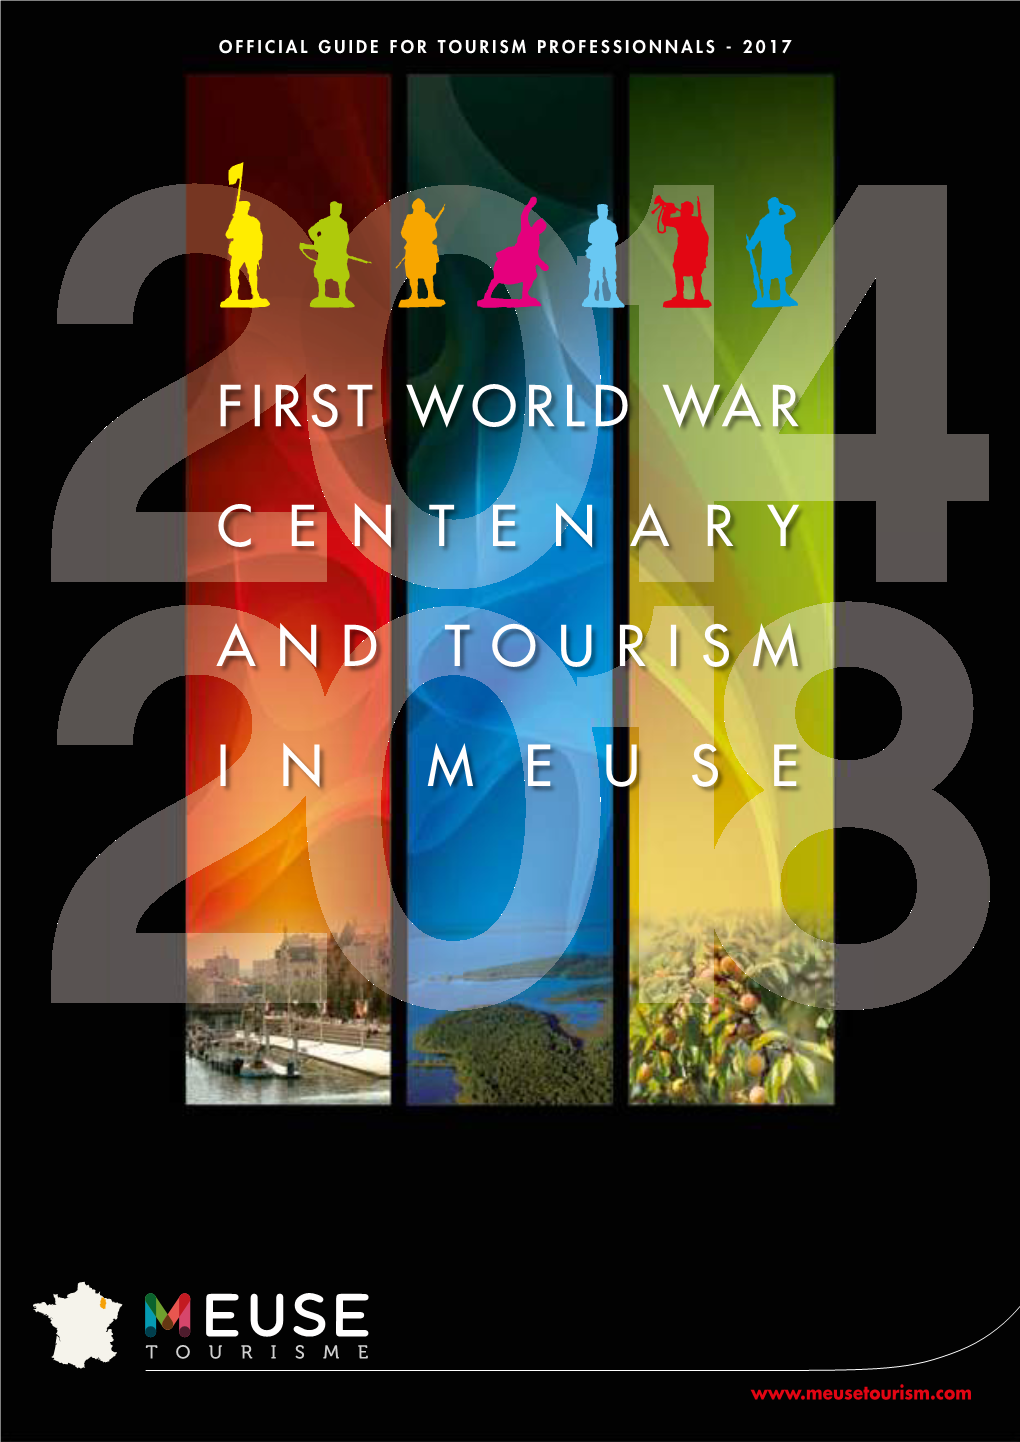 First World War C Entenary and Tourism in M E U Se